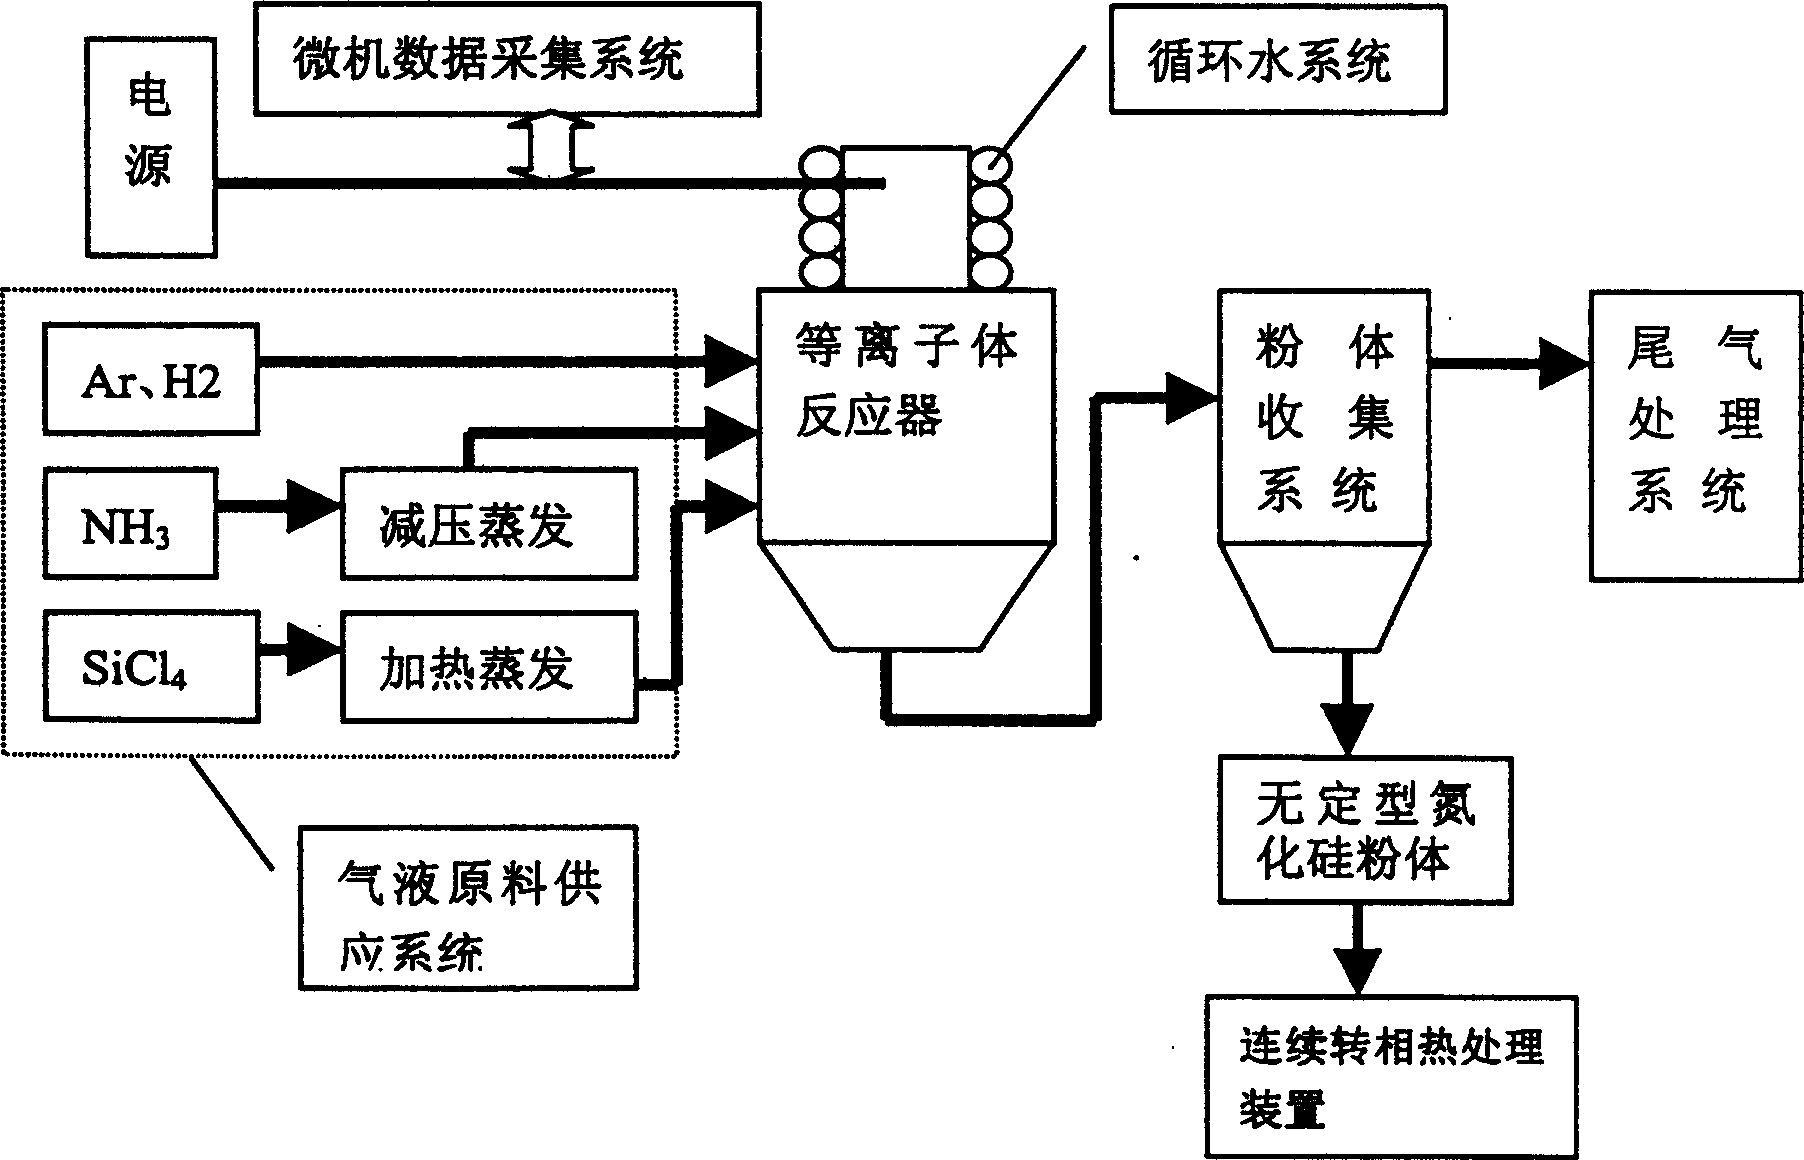 Phase transfer process and system for preparing silicon nitride powder in batches by gas-phase chemical plasma method